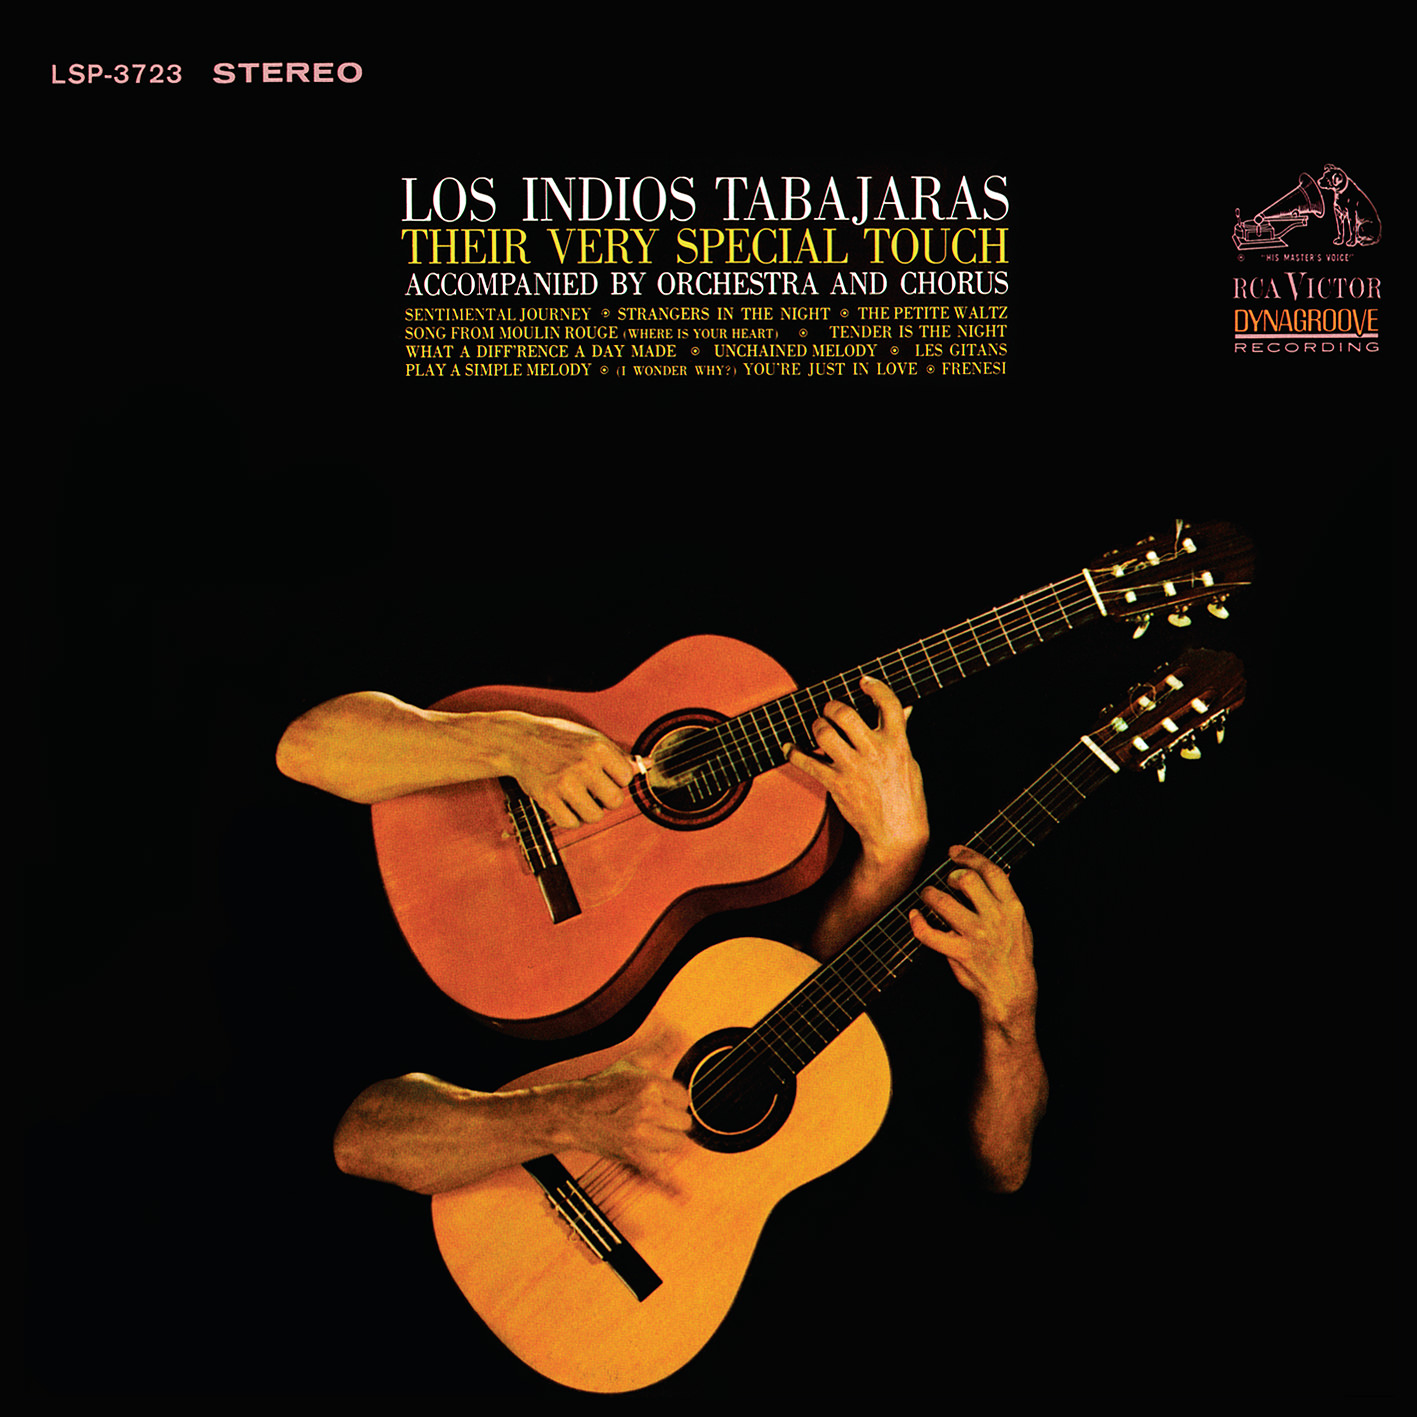 Los Indios Tabajaras – Their Very Special Touch (1967/2017) [AcousticSounds FLAC 24bit/192kHz]